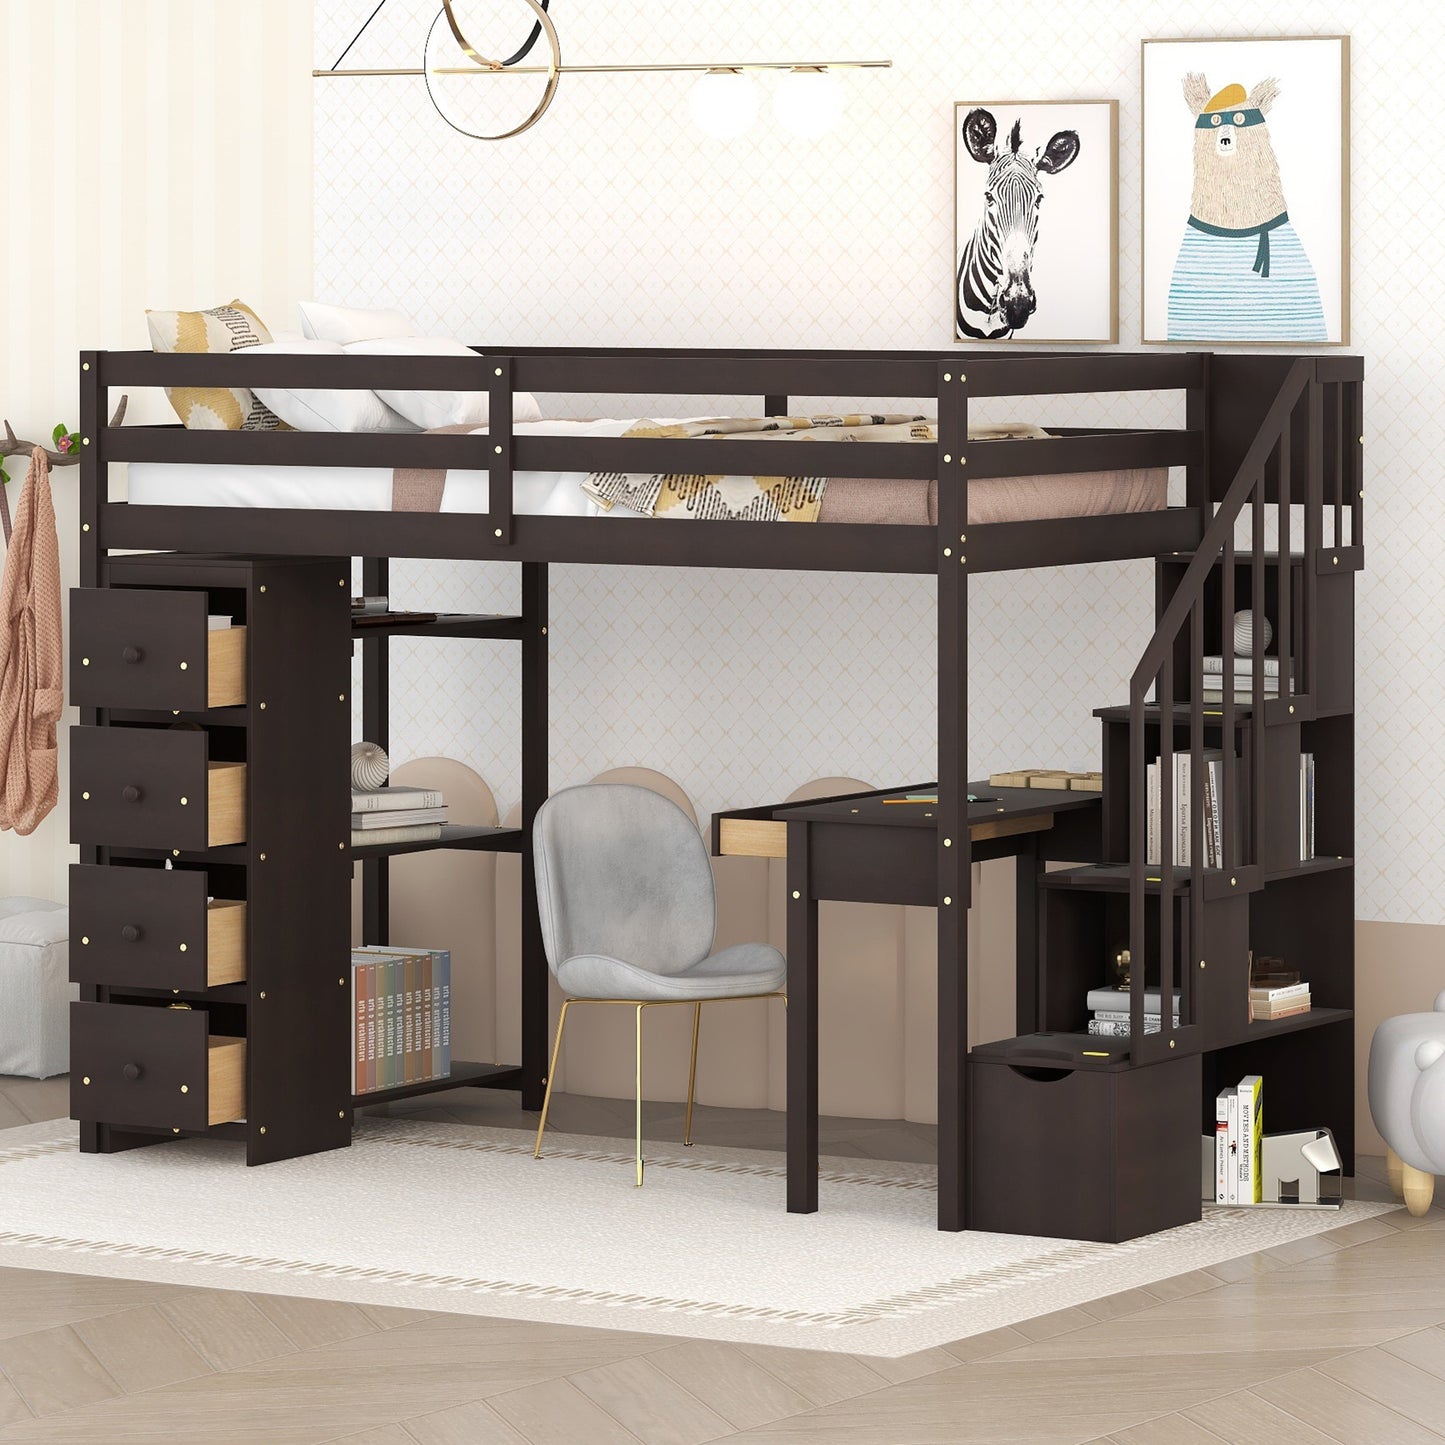 Twin size Loft Bed with Storage Drawers ,Desk and Stairs, Wooden Loft Bed with Shelves - Espresso